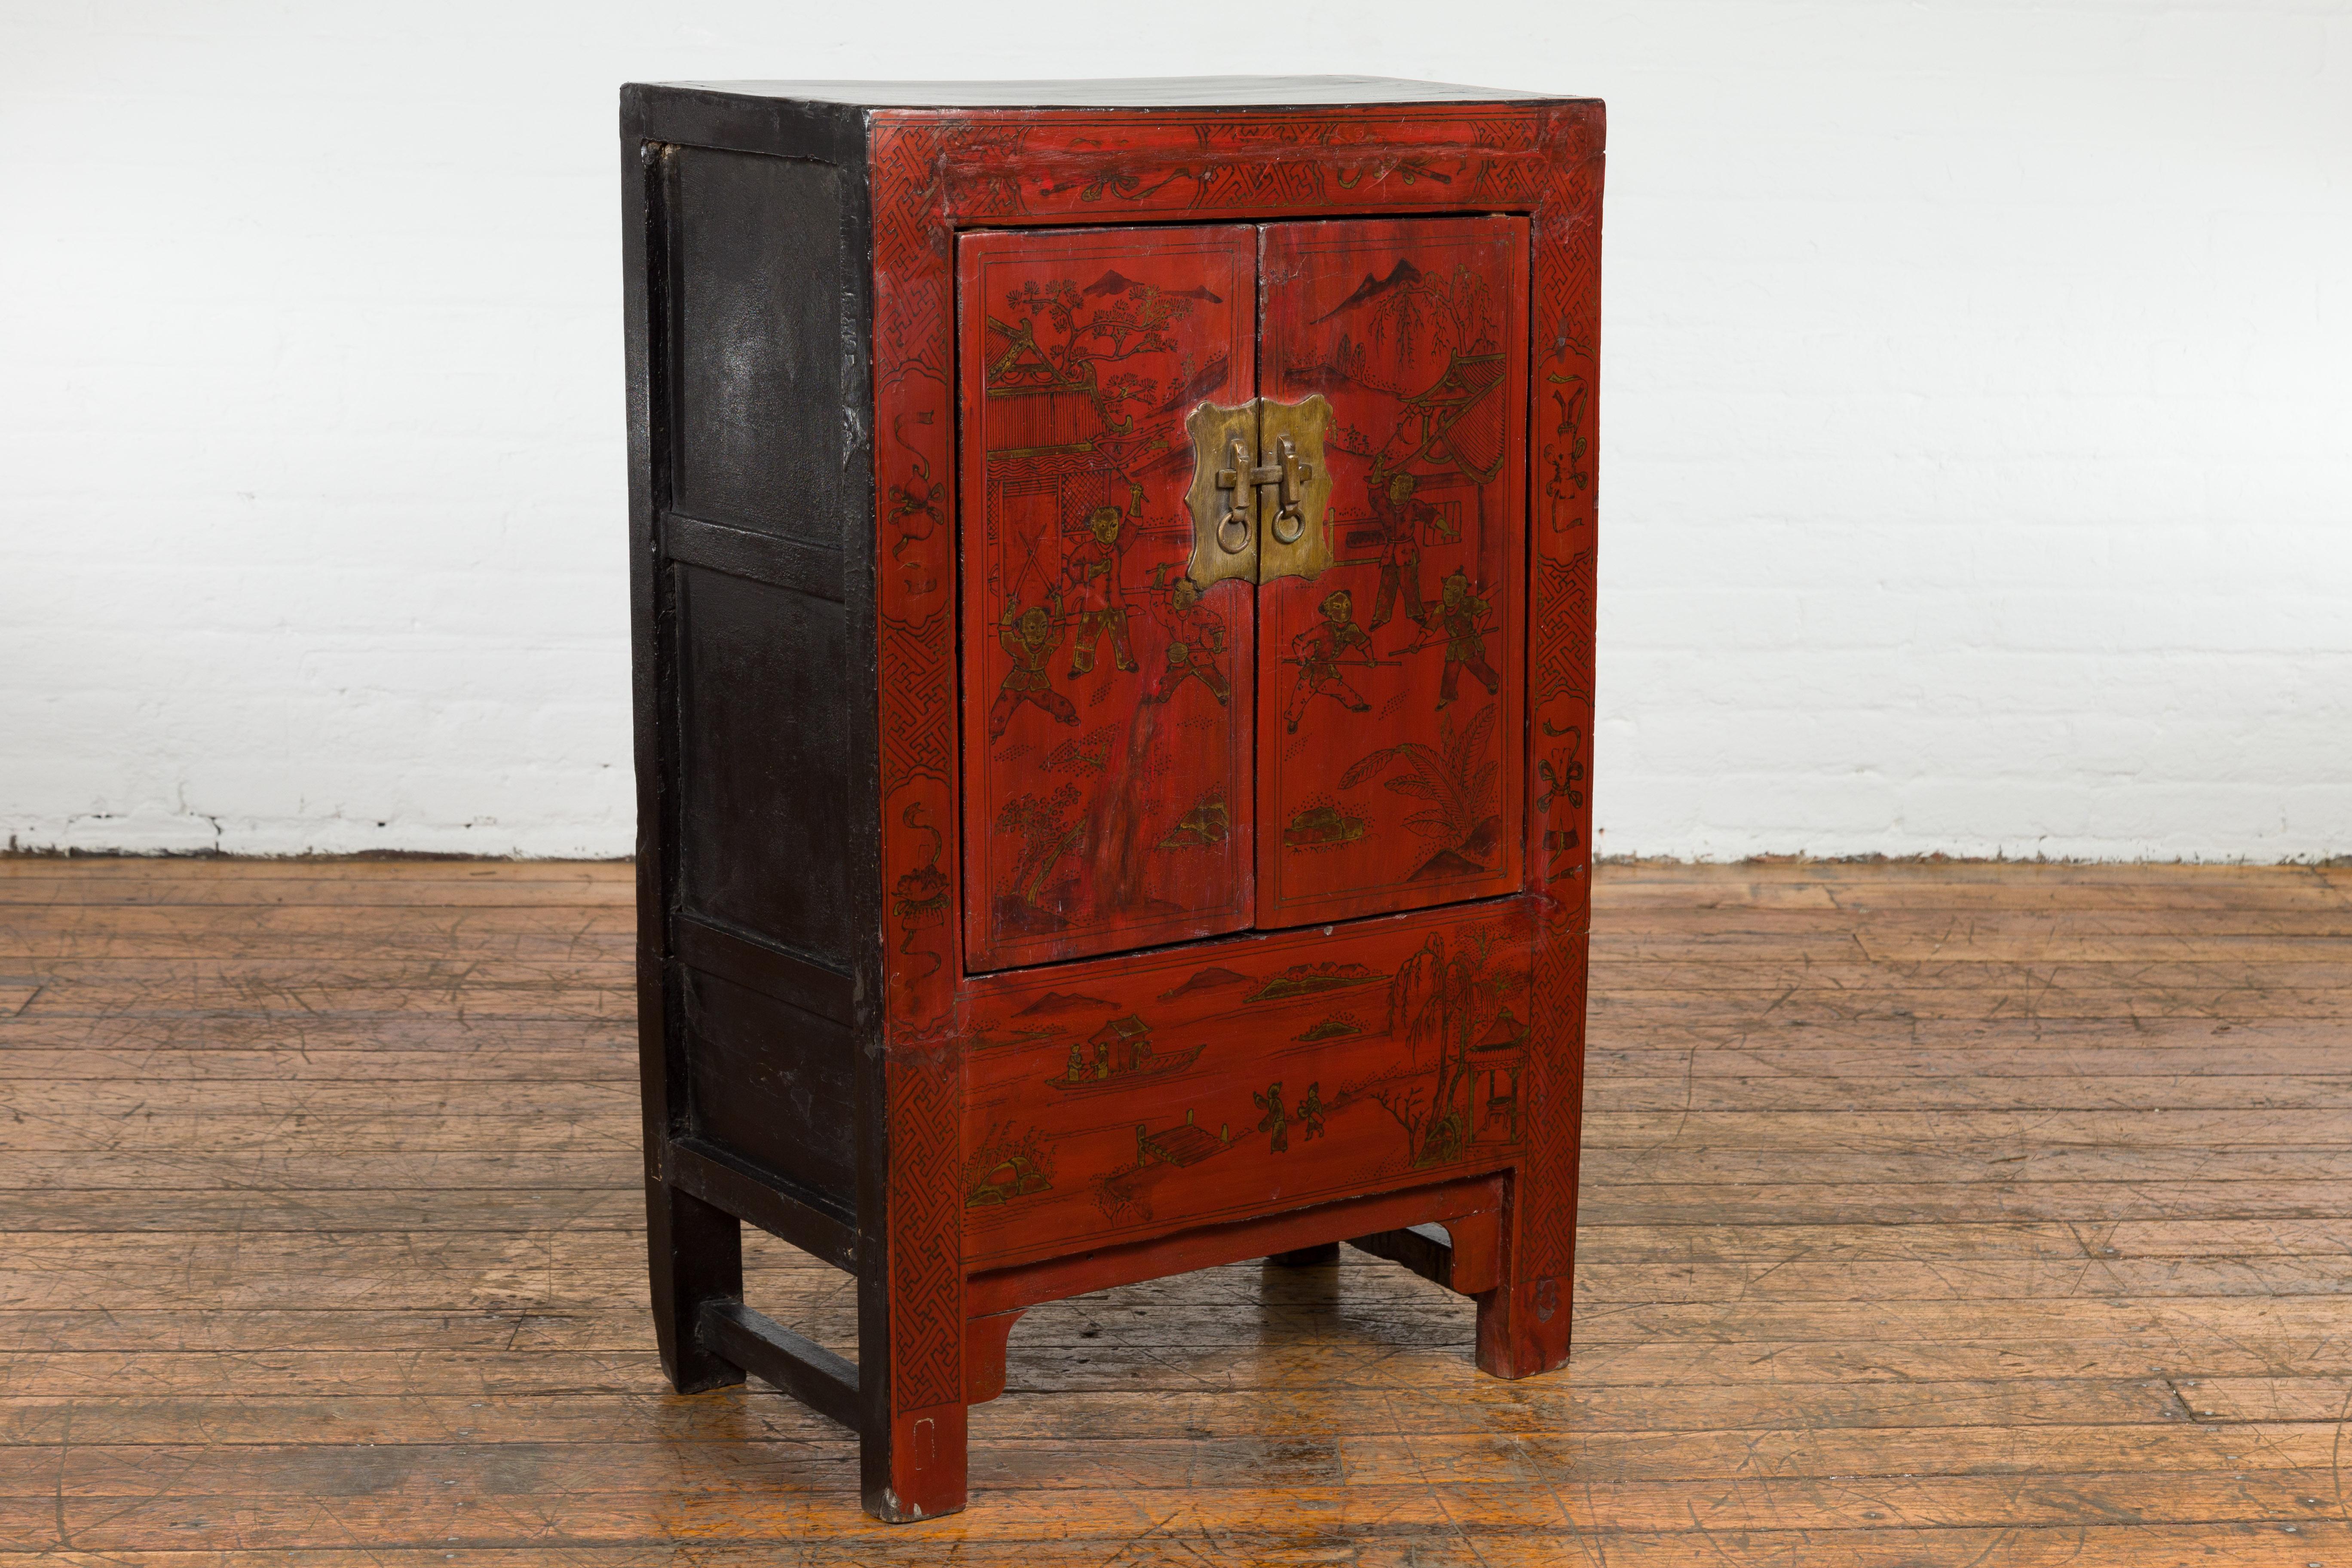 Chinese Qing Dynasty Period Red Lacquer Bedside Cabinet with Hand-Painted Décor In Good Condition For Sale In Yonkers, NY